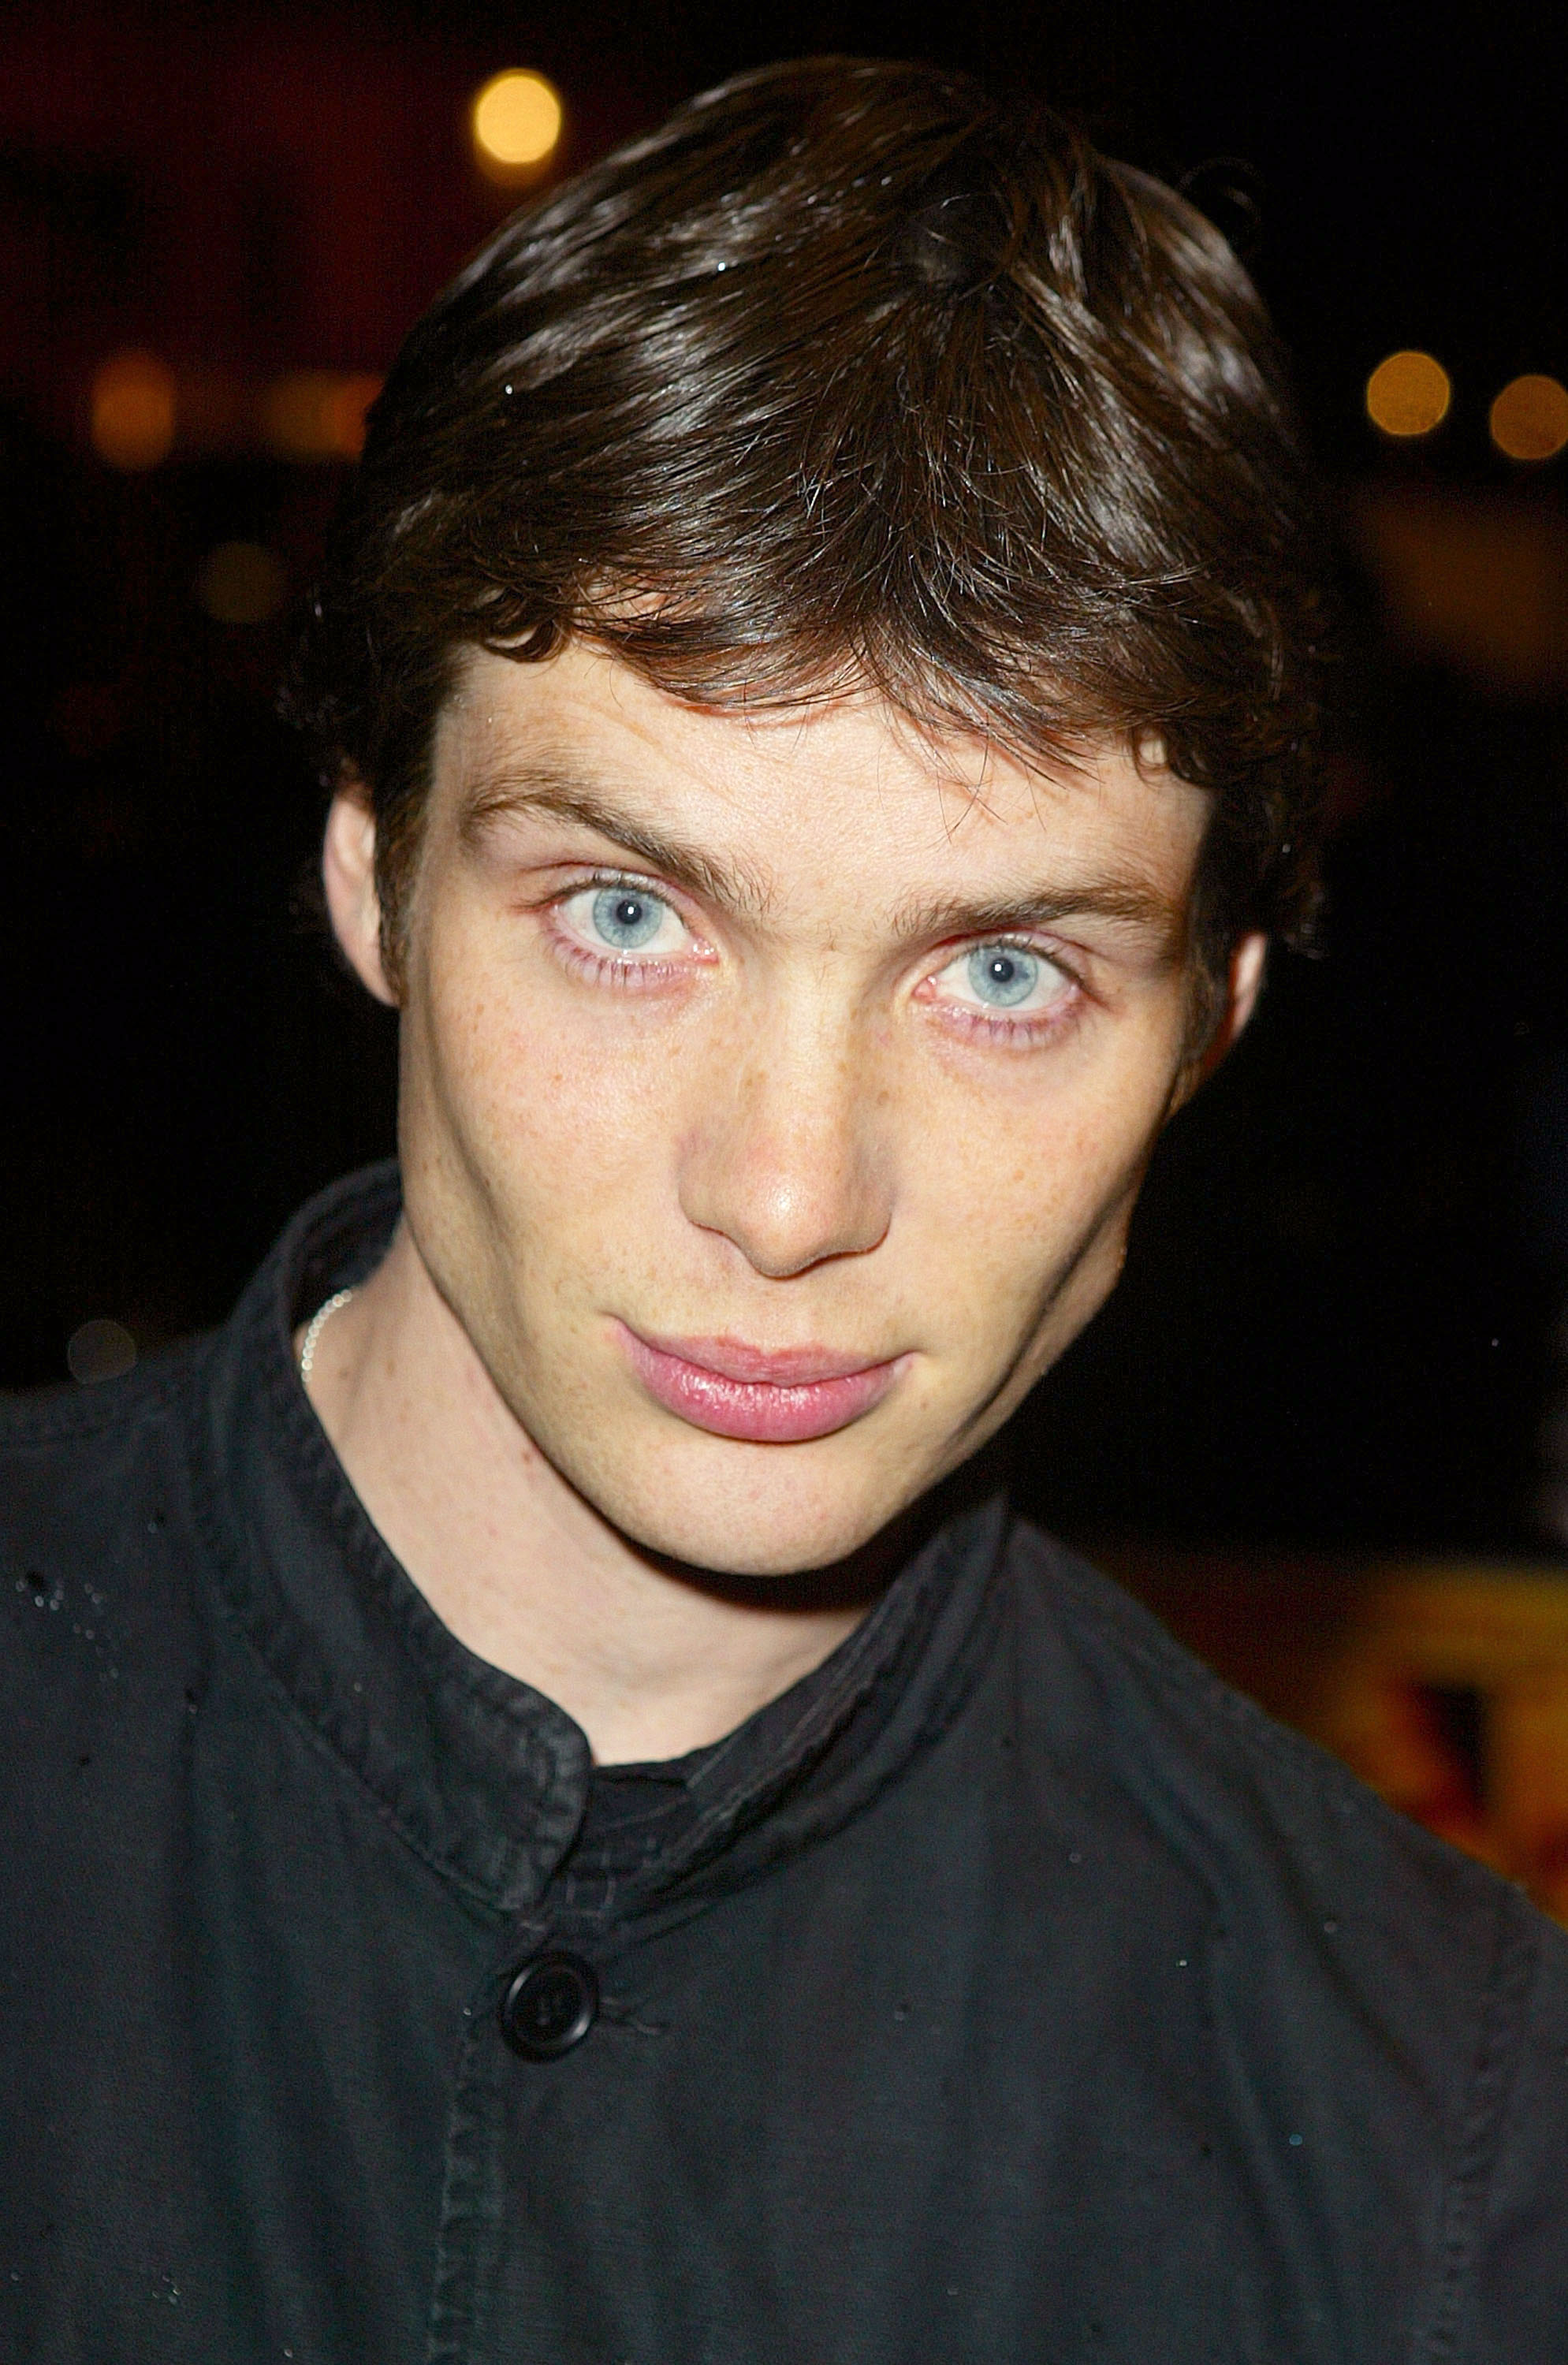 Cillian Murphy attends the "Intermission" London premiere on November 23, 2003 in London, England | Source: Getty Images